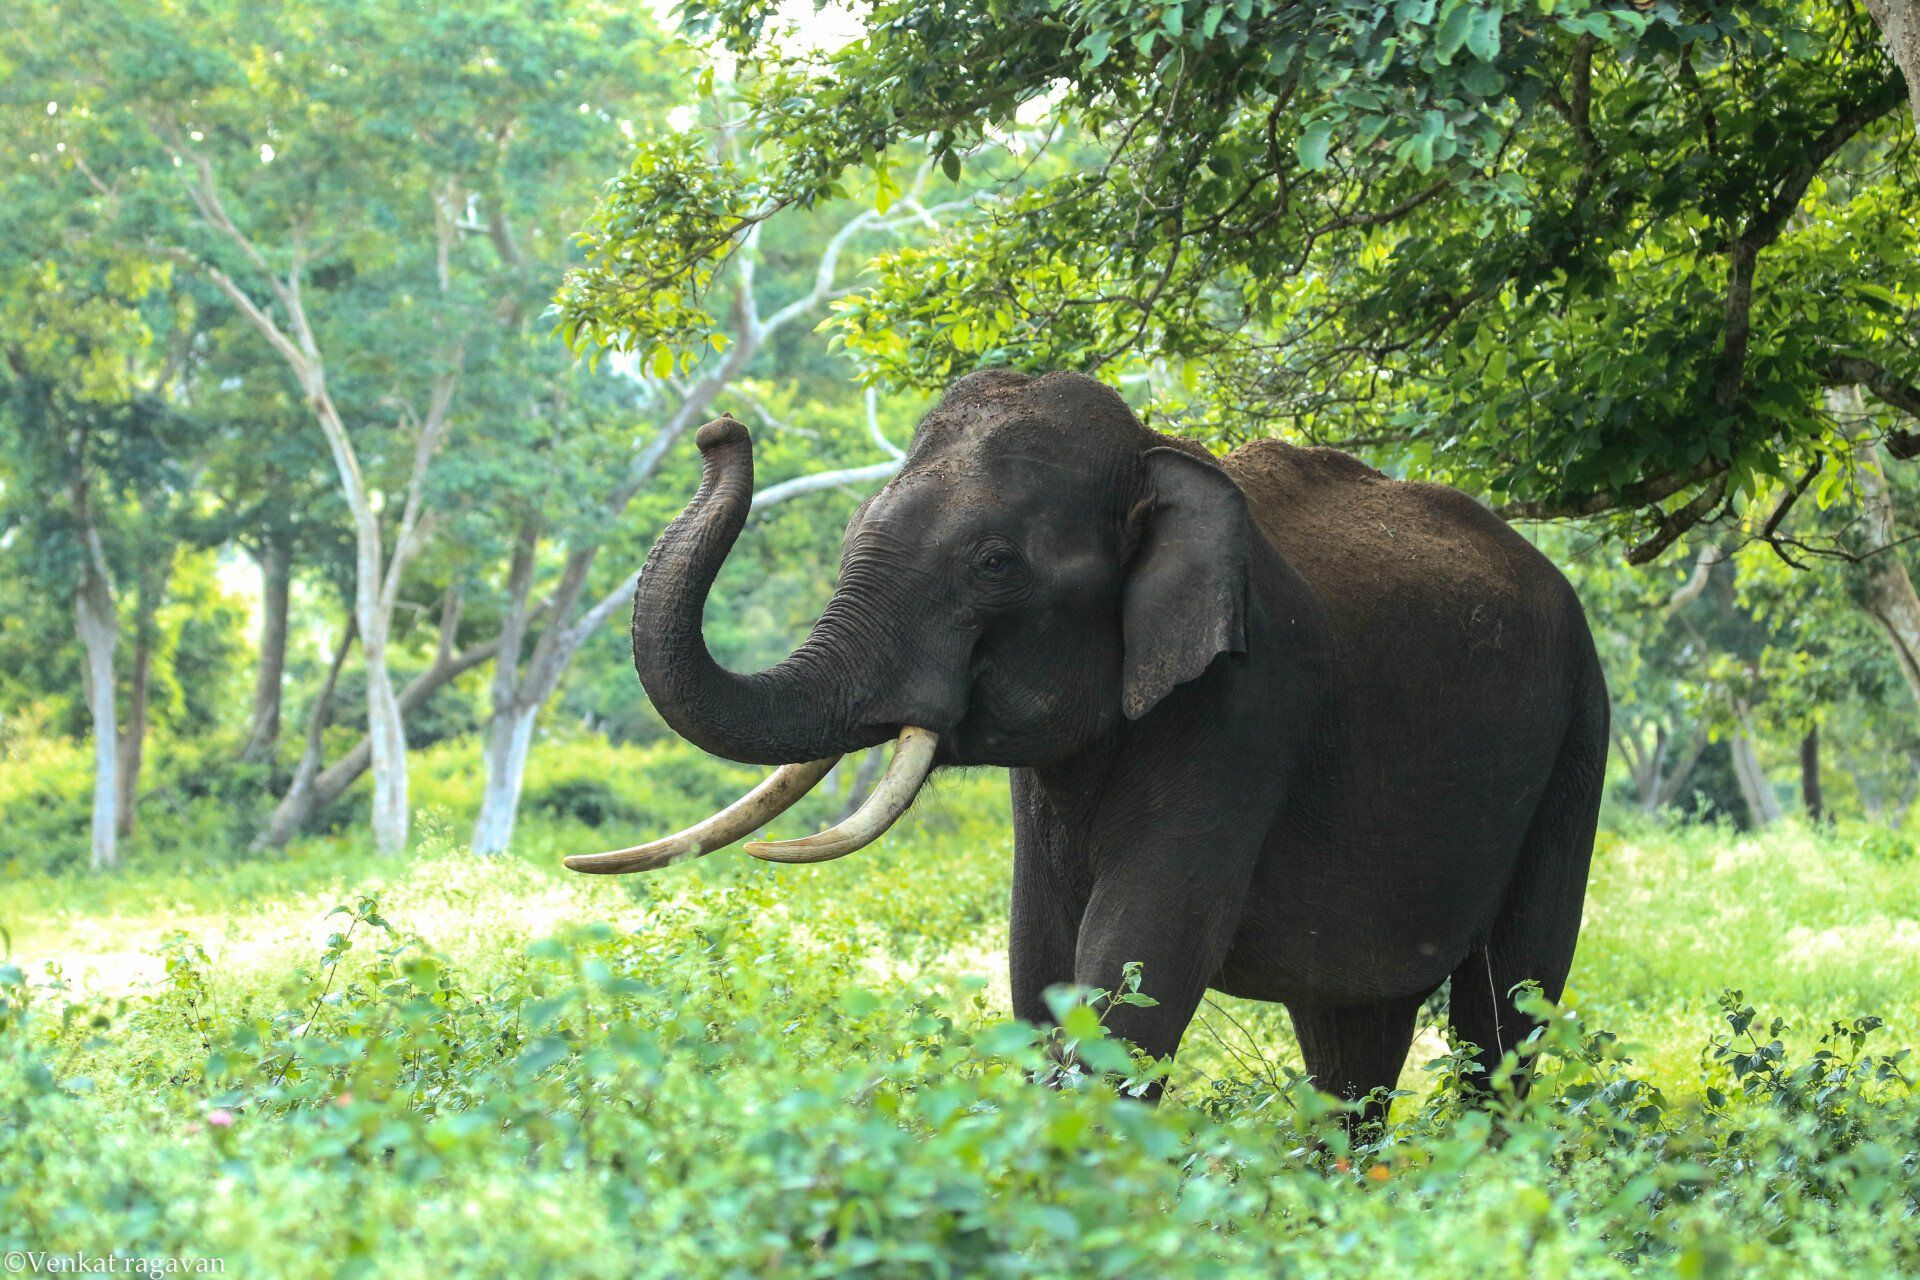 an elephant with long tusks is standing in a grassy field .